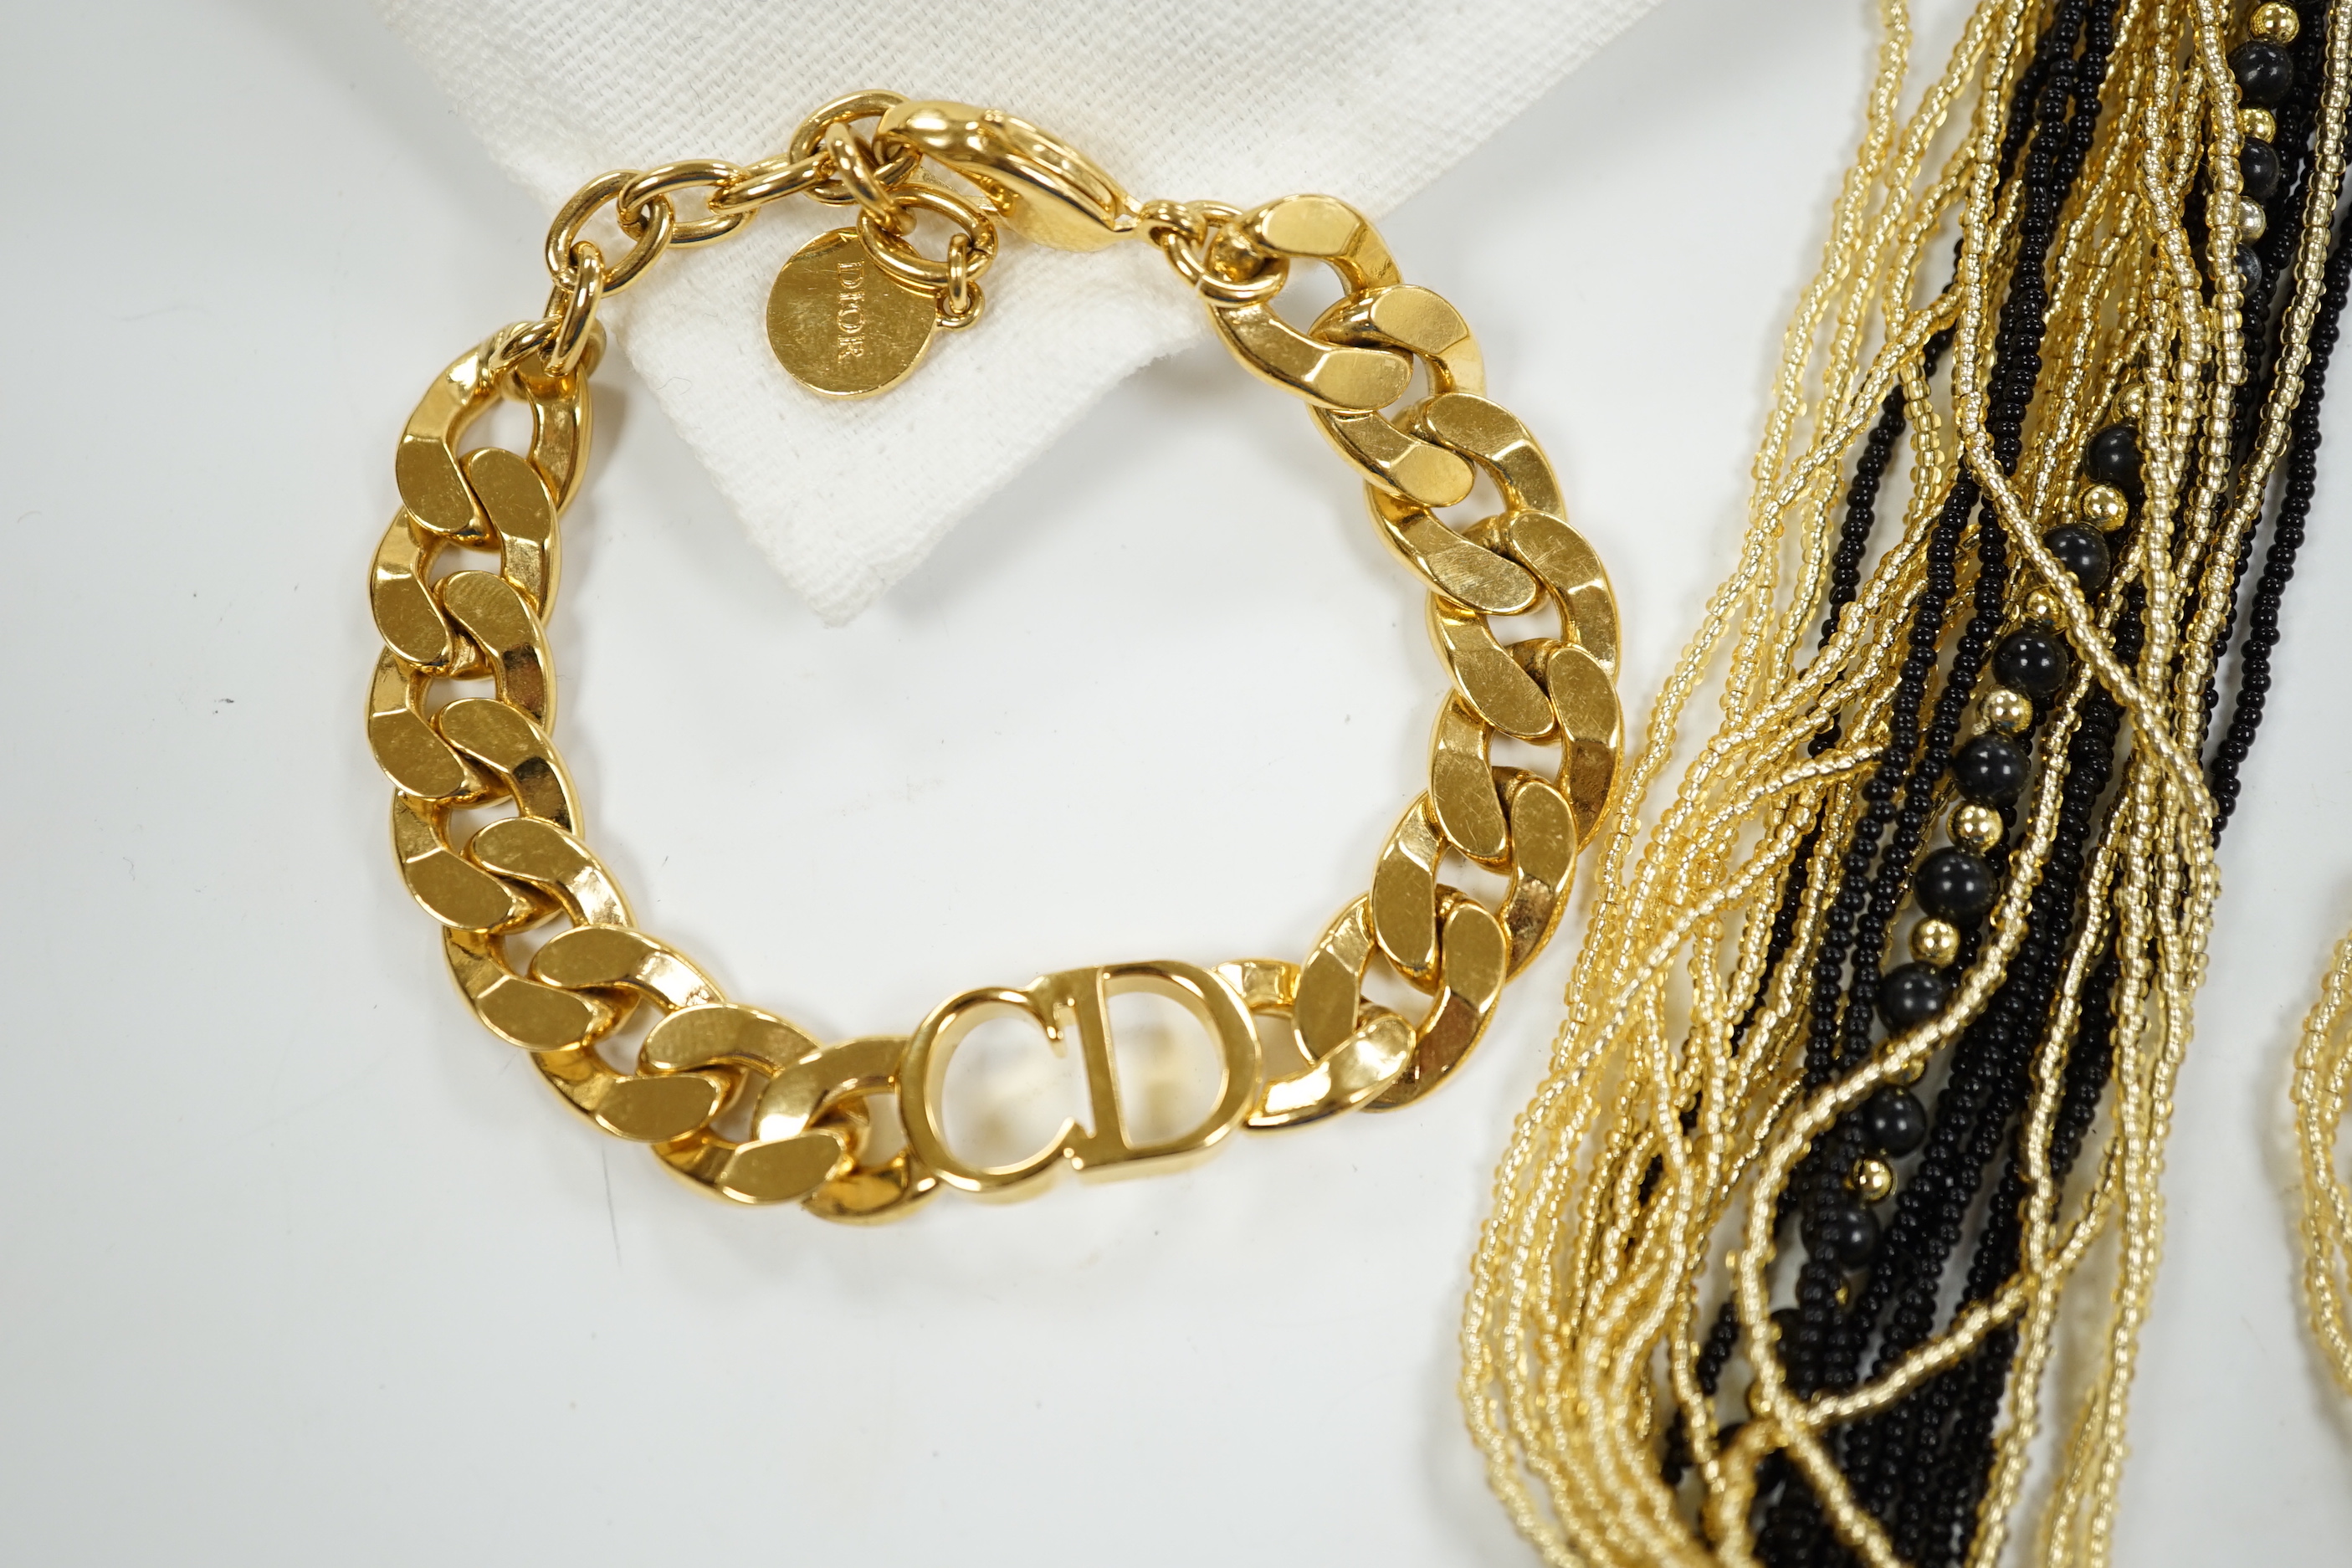 A Christian Dior Danseuse Etoile gilt bracelet, 18cm, with Dior box and pamphlet etc. together with a Luciani Murano glass bead twist necklace, 48cm.